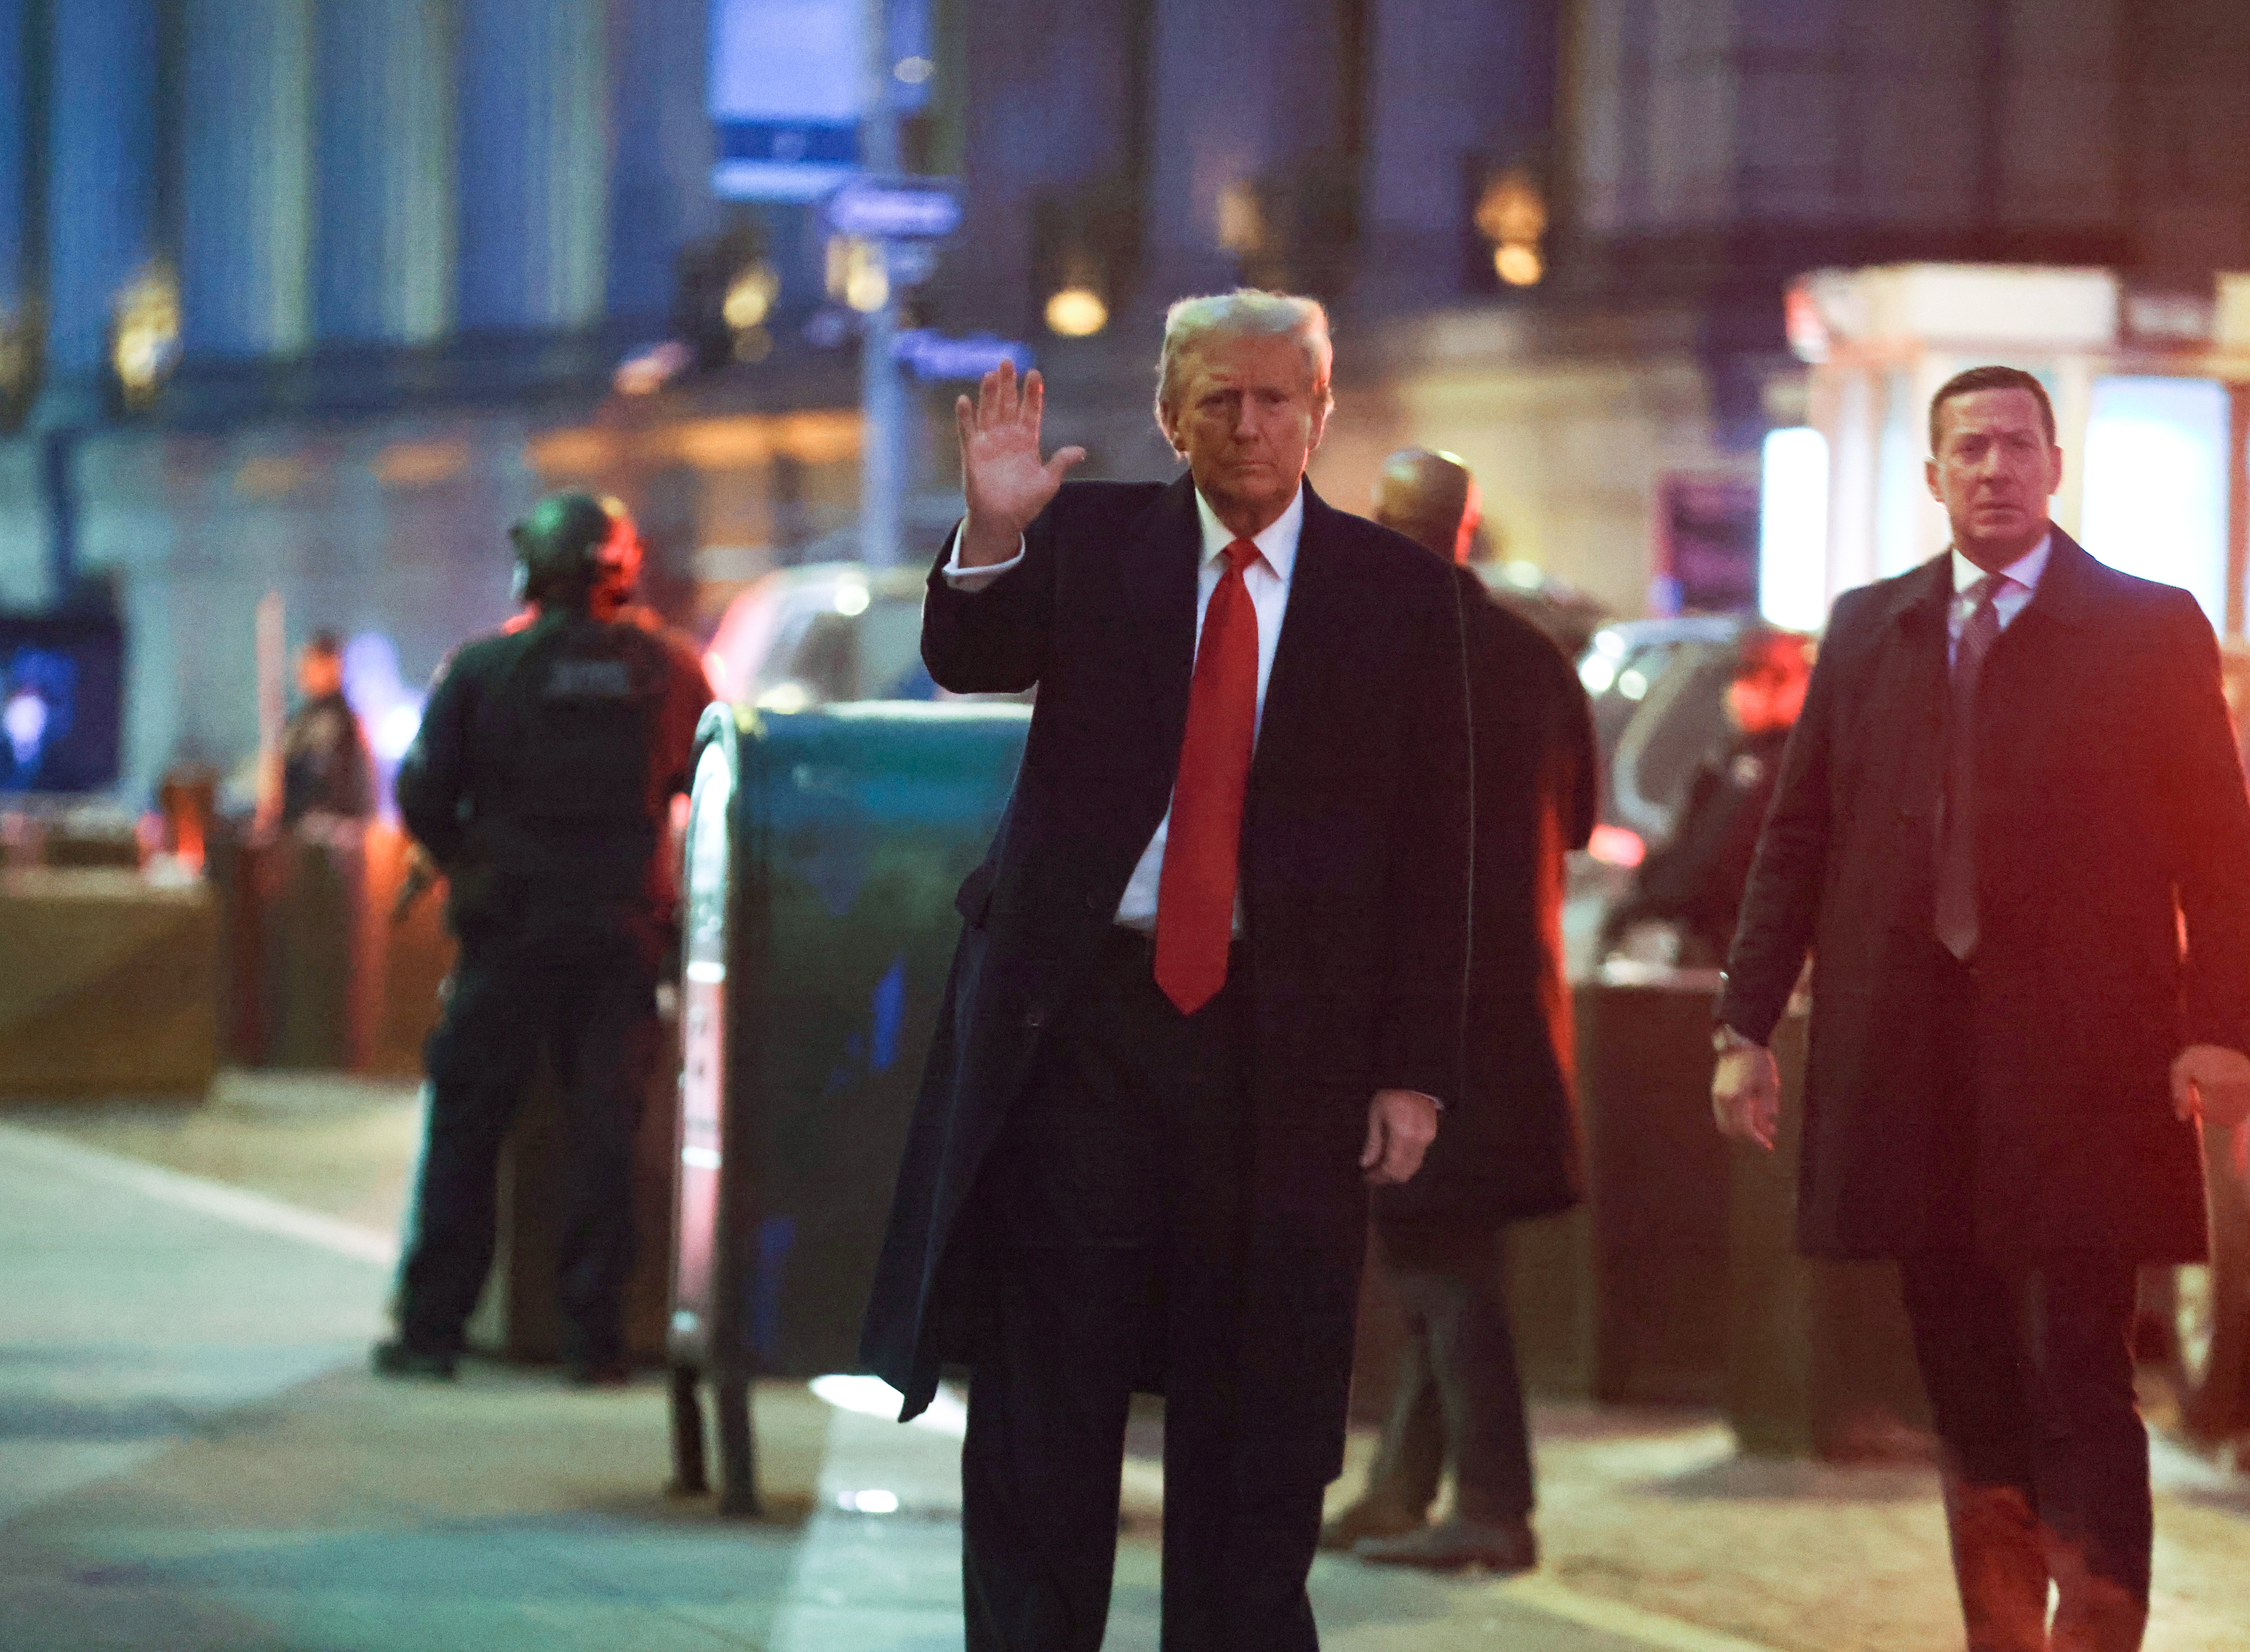 Former President Donald Trump waves as he arrives at the Trump Building.